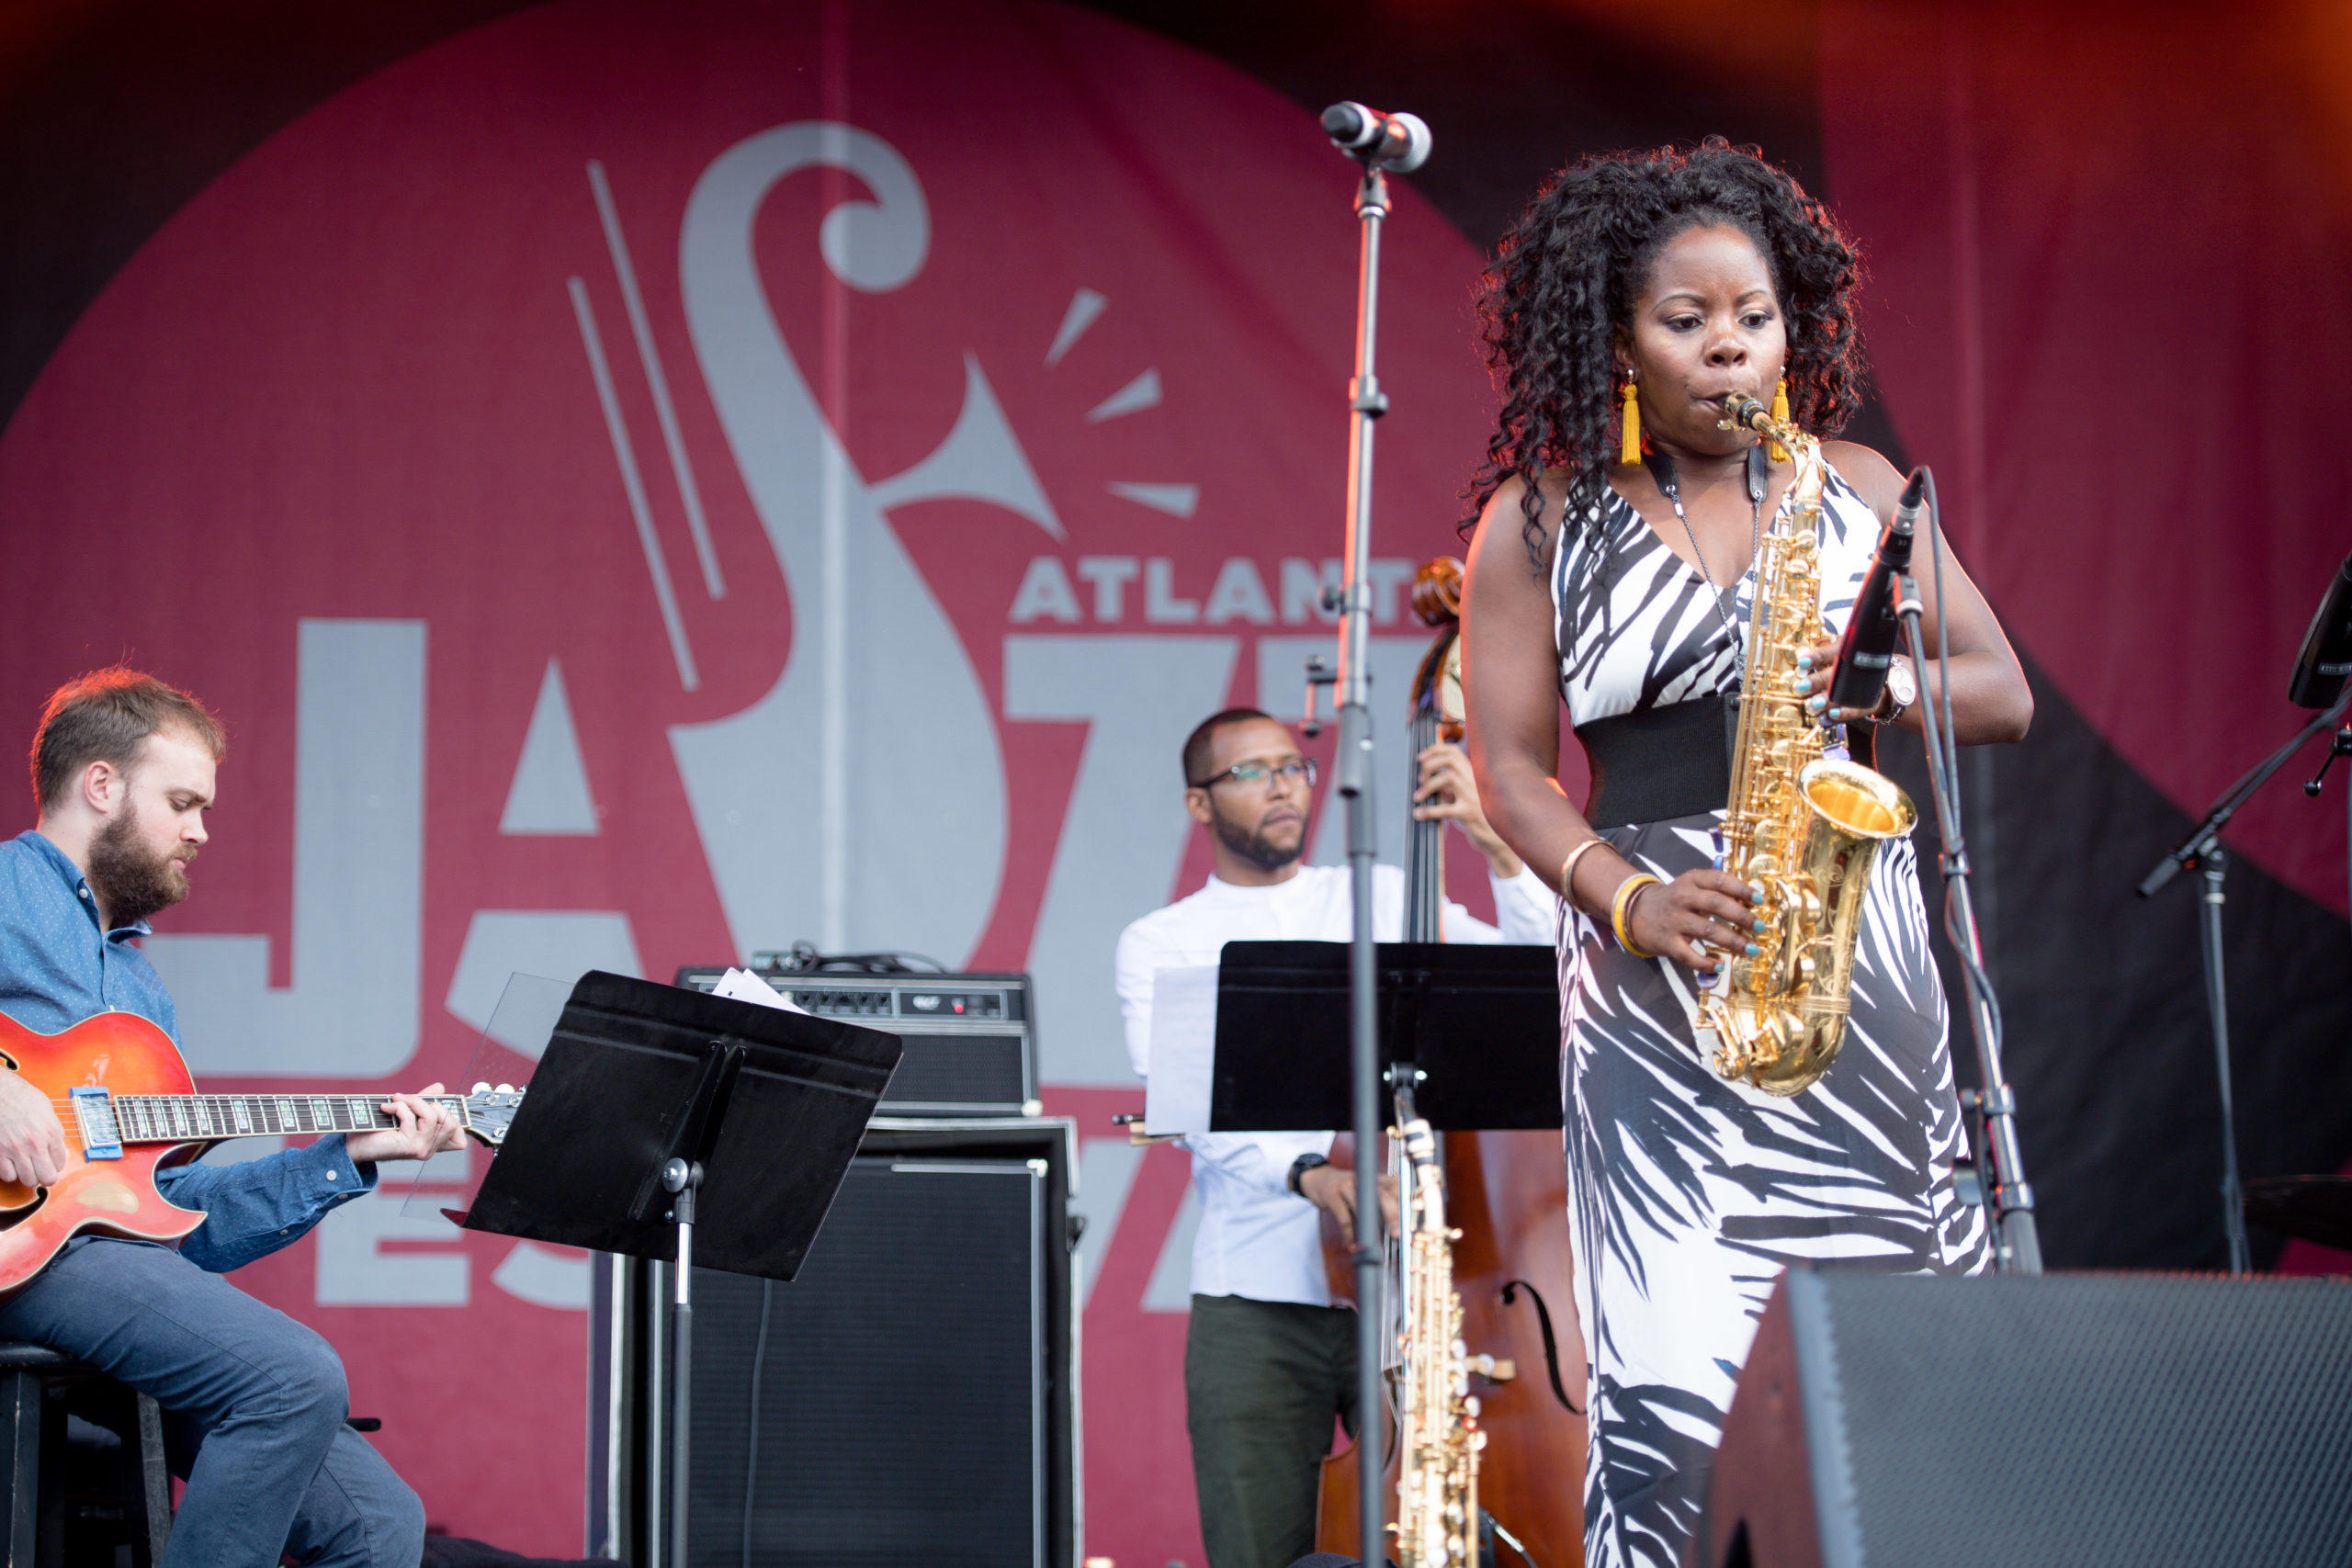 Atlanta Jazz Festival 2019 What You Need to Know About City's 40Year